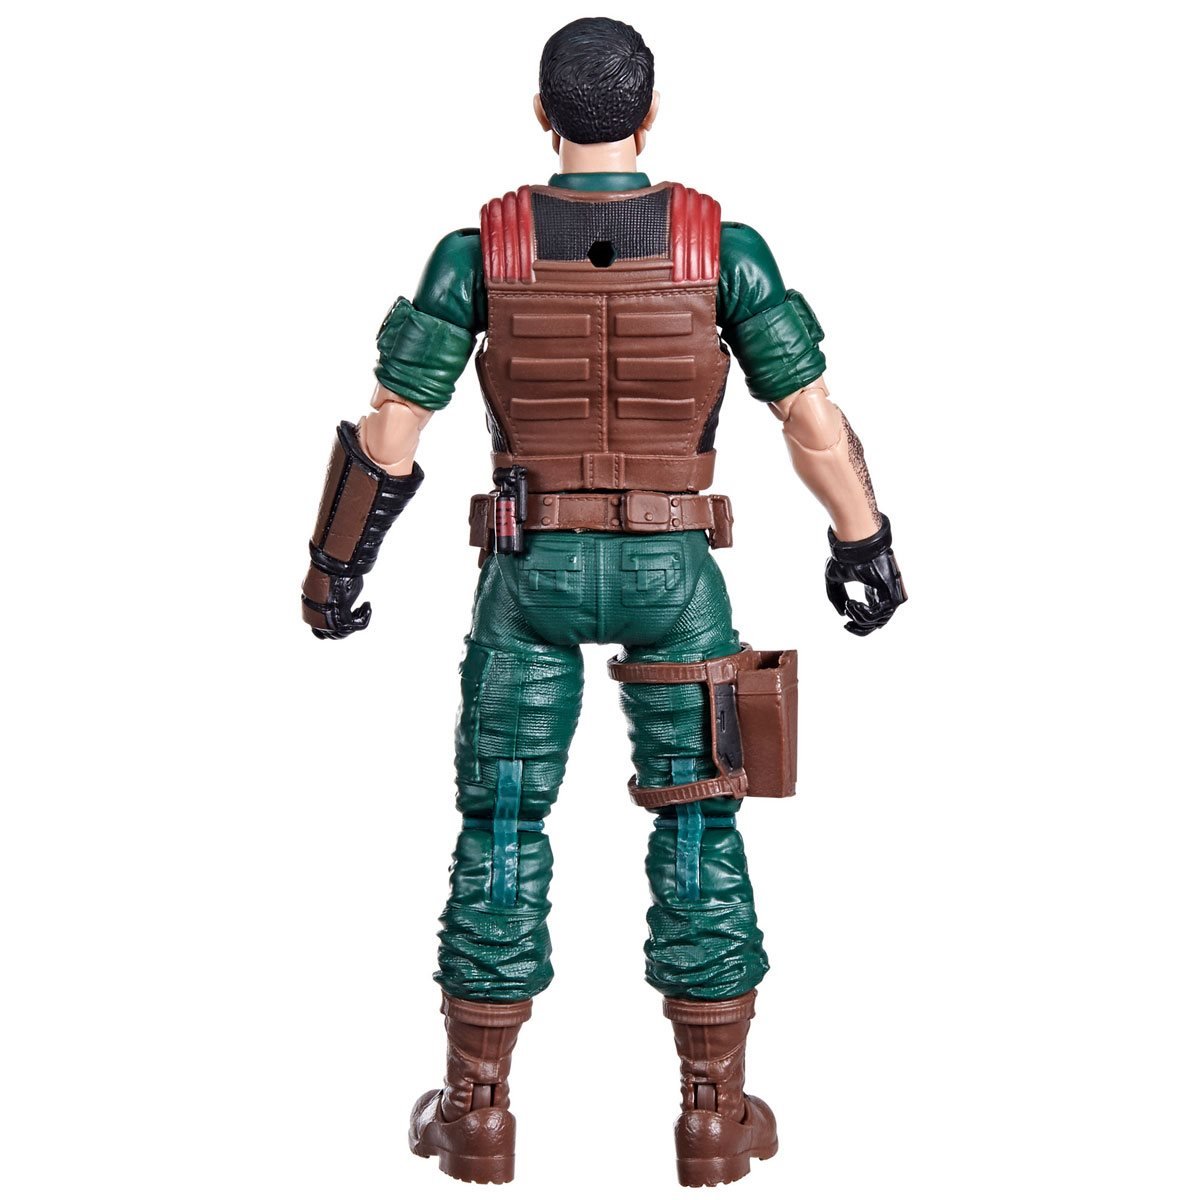 G.I. Joe Classified Series Deluxe Mutt and Junkyard 6-Inch Action